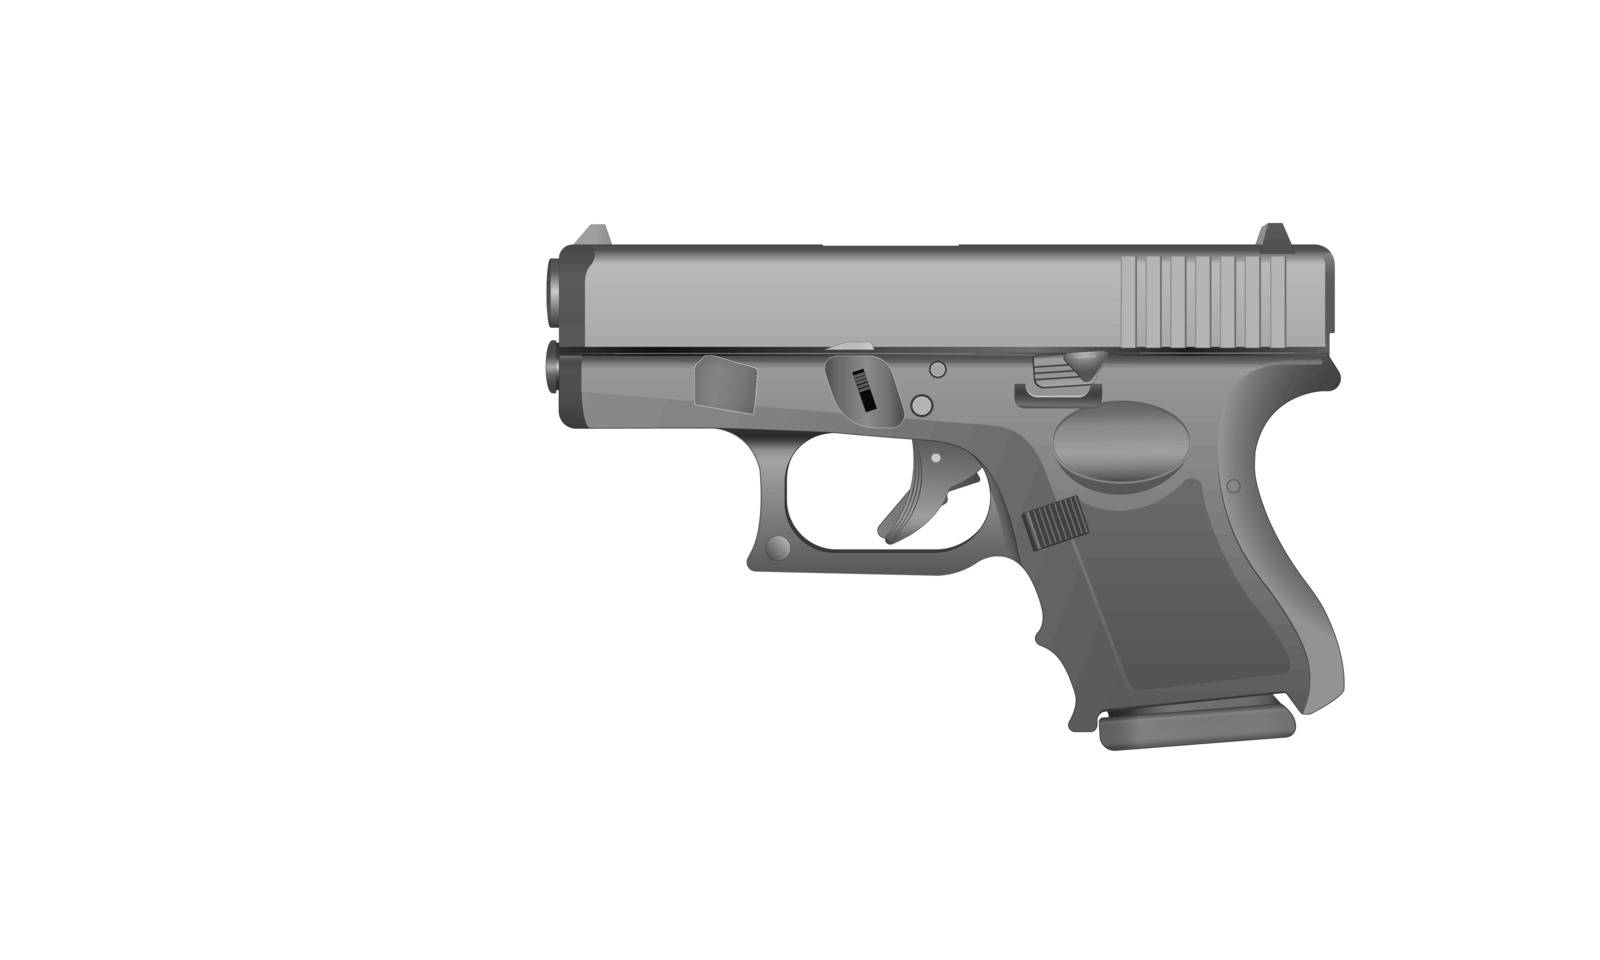 An illustration of a grey metal handgun on a white background. Gradients are used in the illustration.